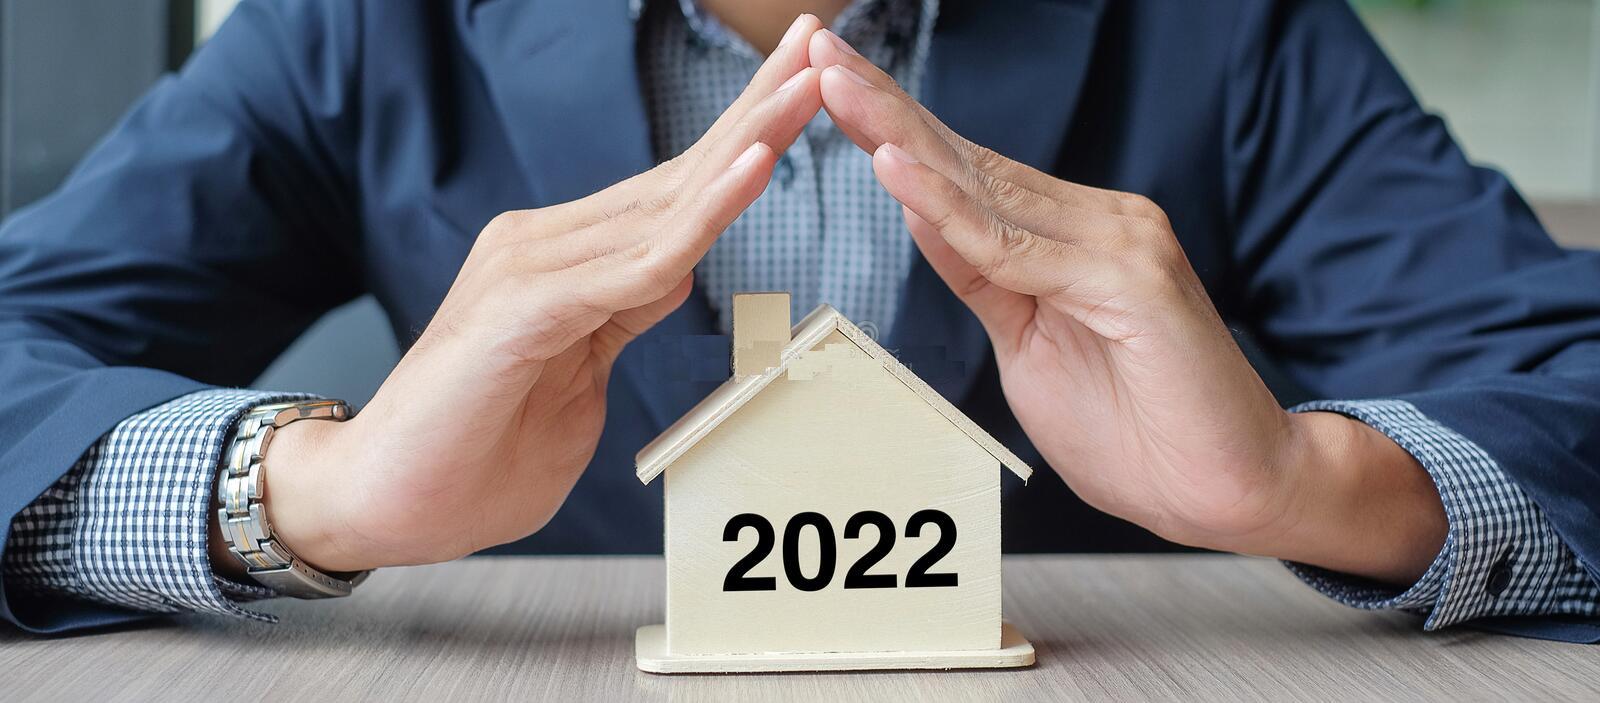 Year 2022 will bring of Great Opportunities for Indian Real Estate